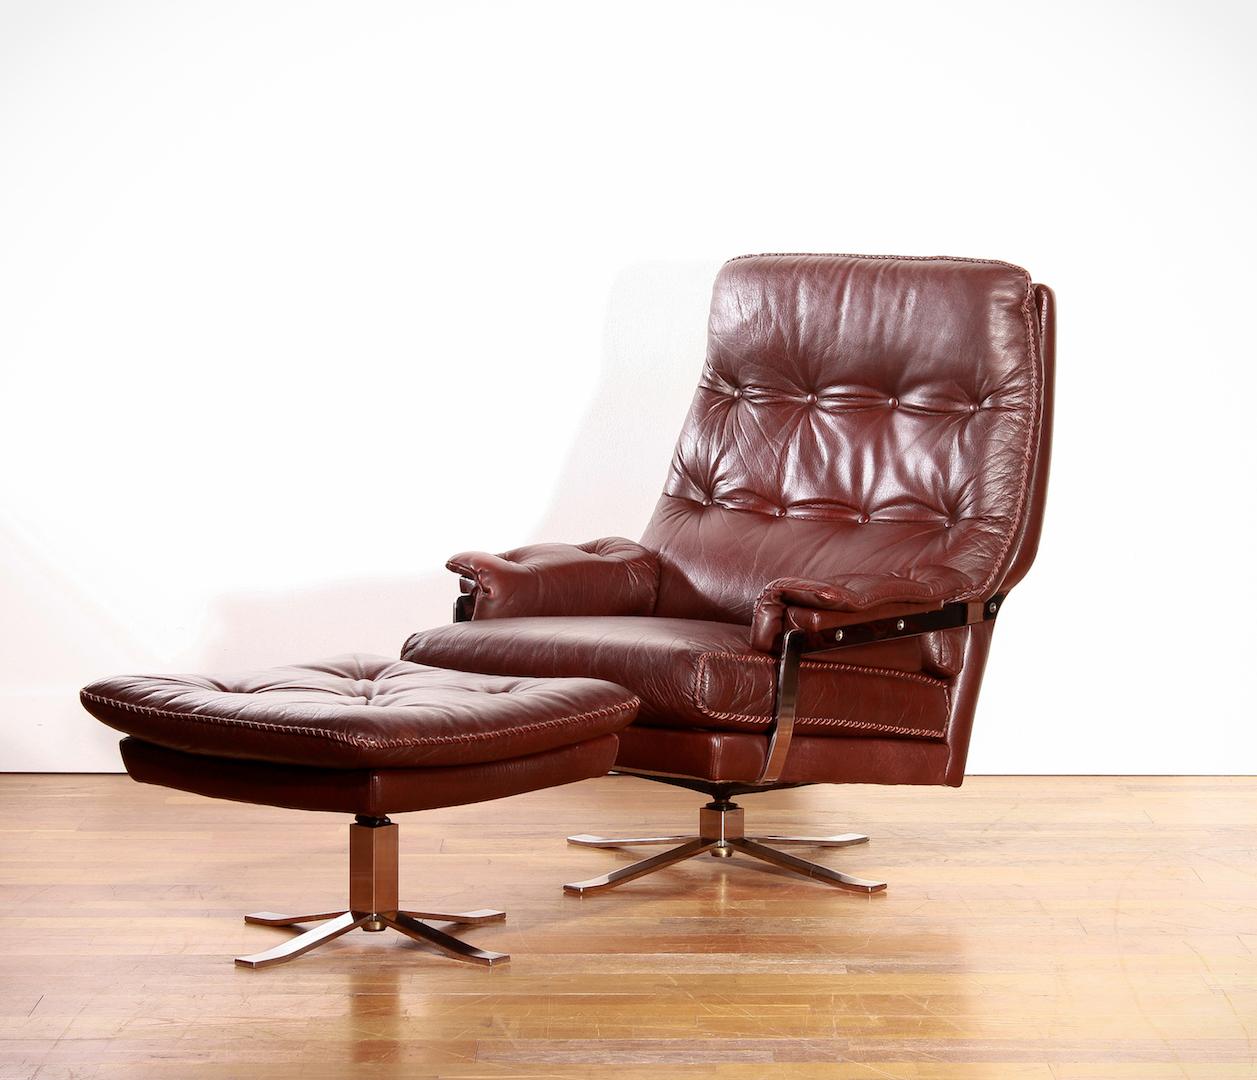 Beautiful high quality leather lounge chair and ottoman designed by Arne Norell and produced by Vatne Møbler.
The leather is hand-stitched and in excellent condition.
Period 1960s.
 